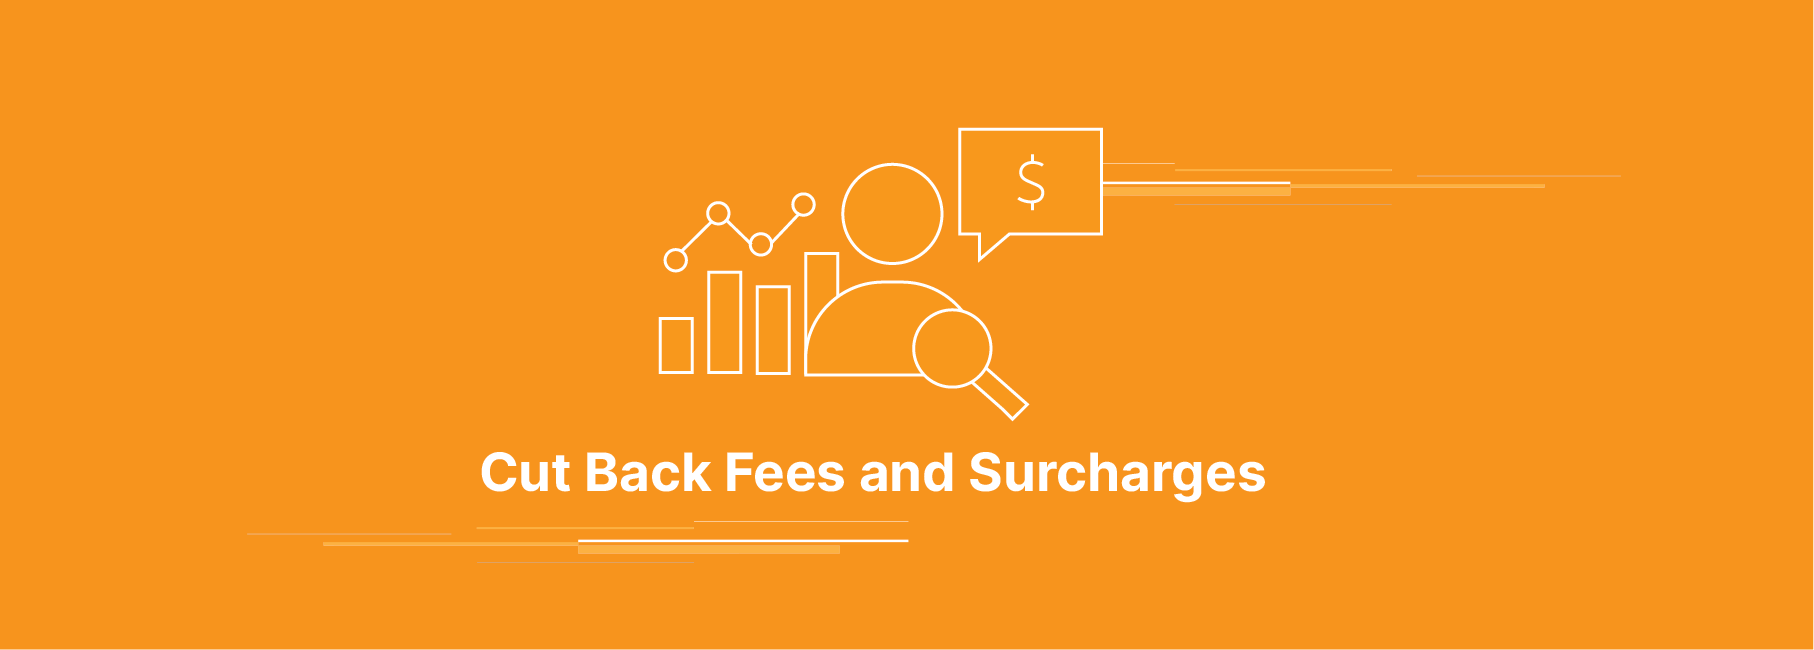 How to Cut Back on Accessorial Fees and Surcharges on Small Parcel Invoices